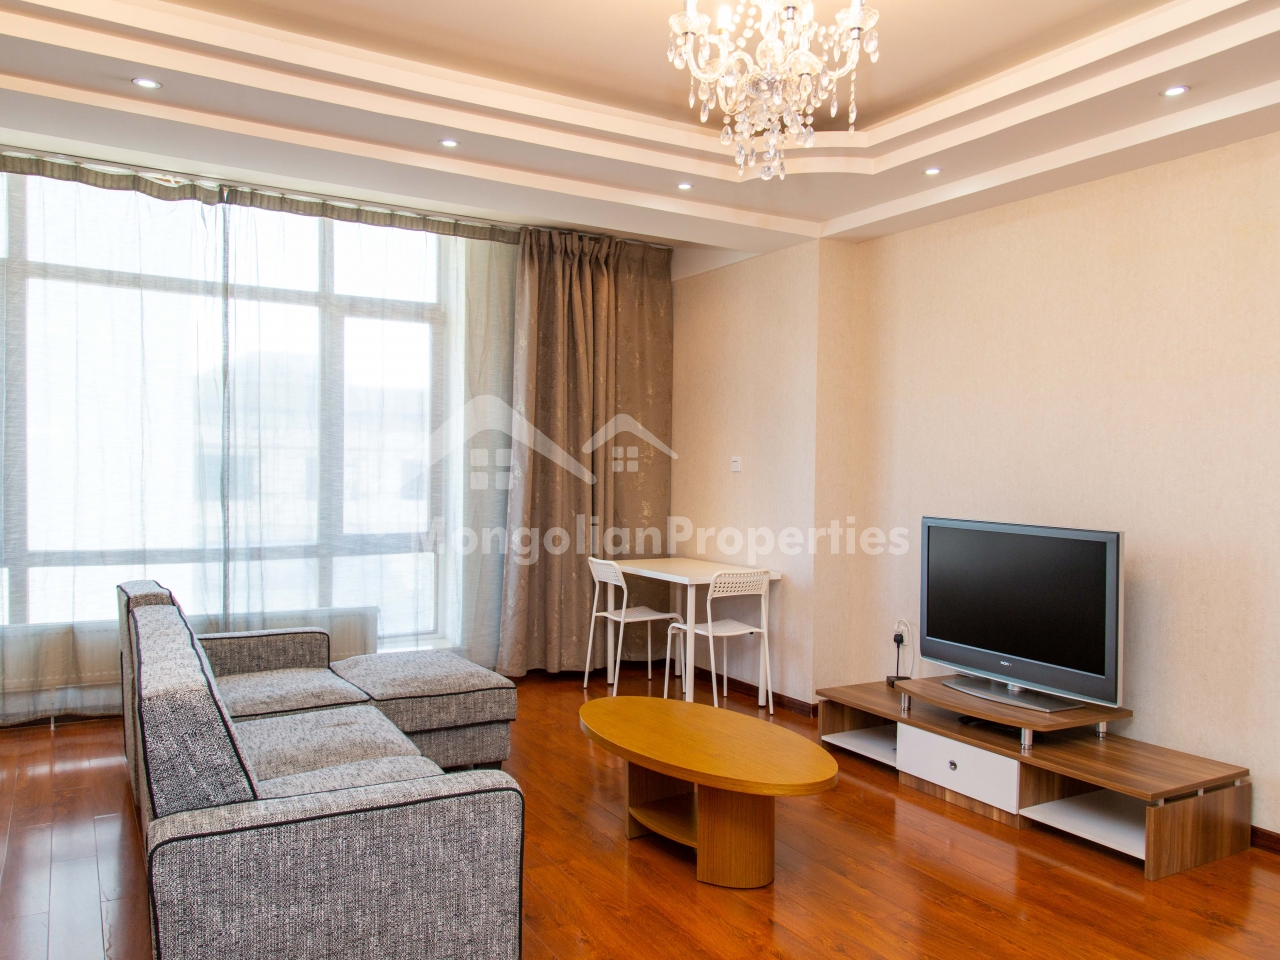 Spacious 1 bedroom apartment is for rent at the Elite tower